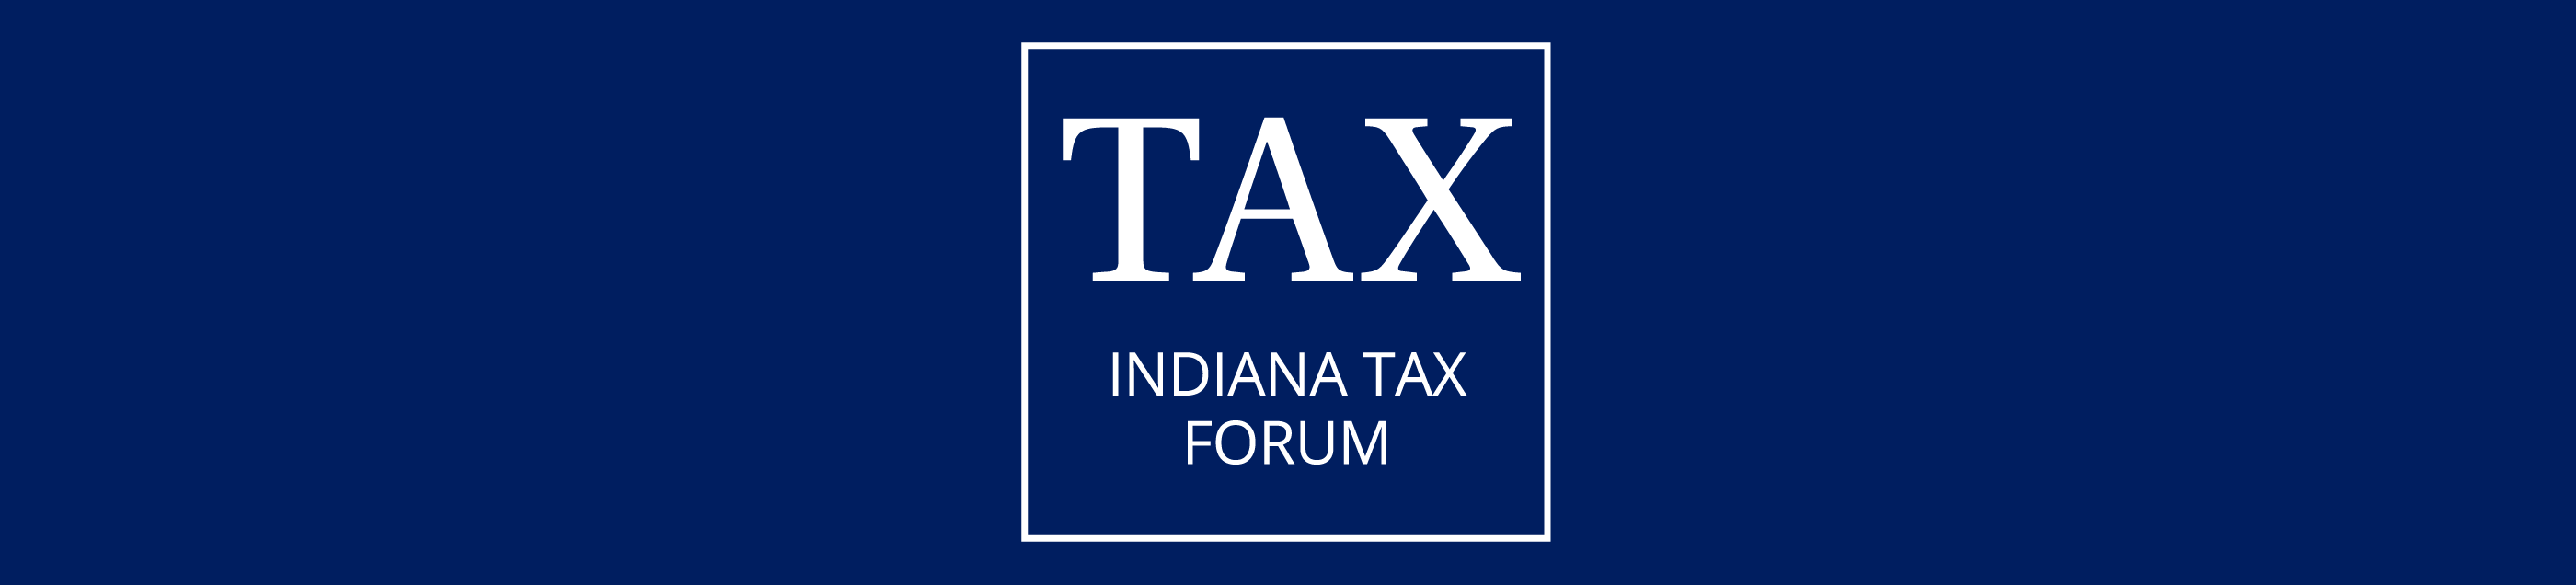 Indiana Tax Forum banner image